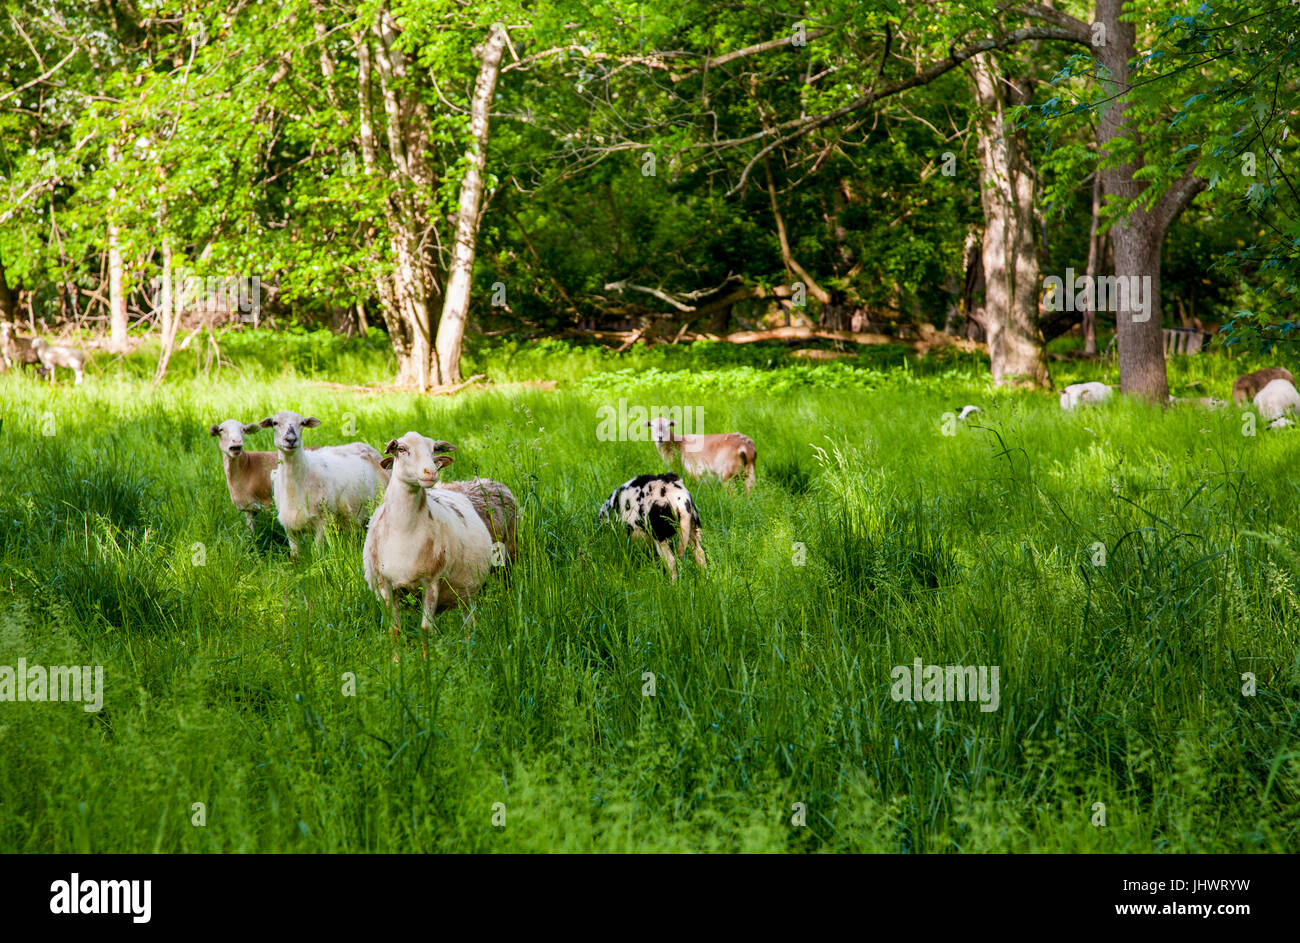 Lamb and sheep in field Stock Photo